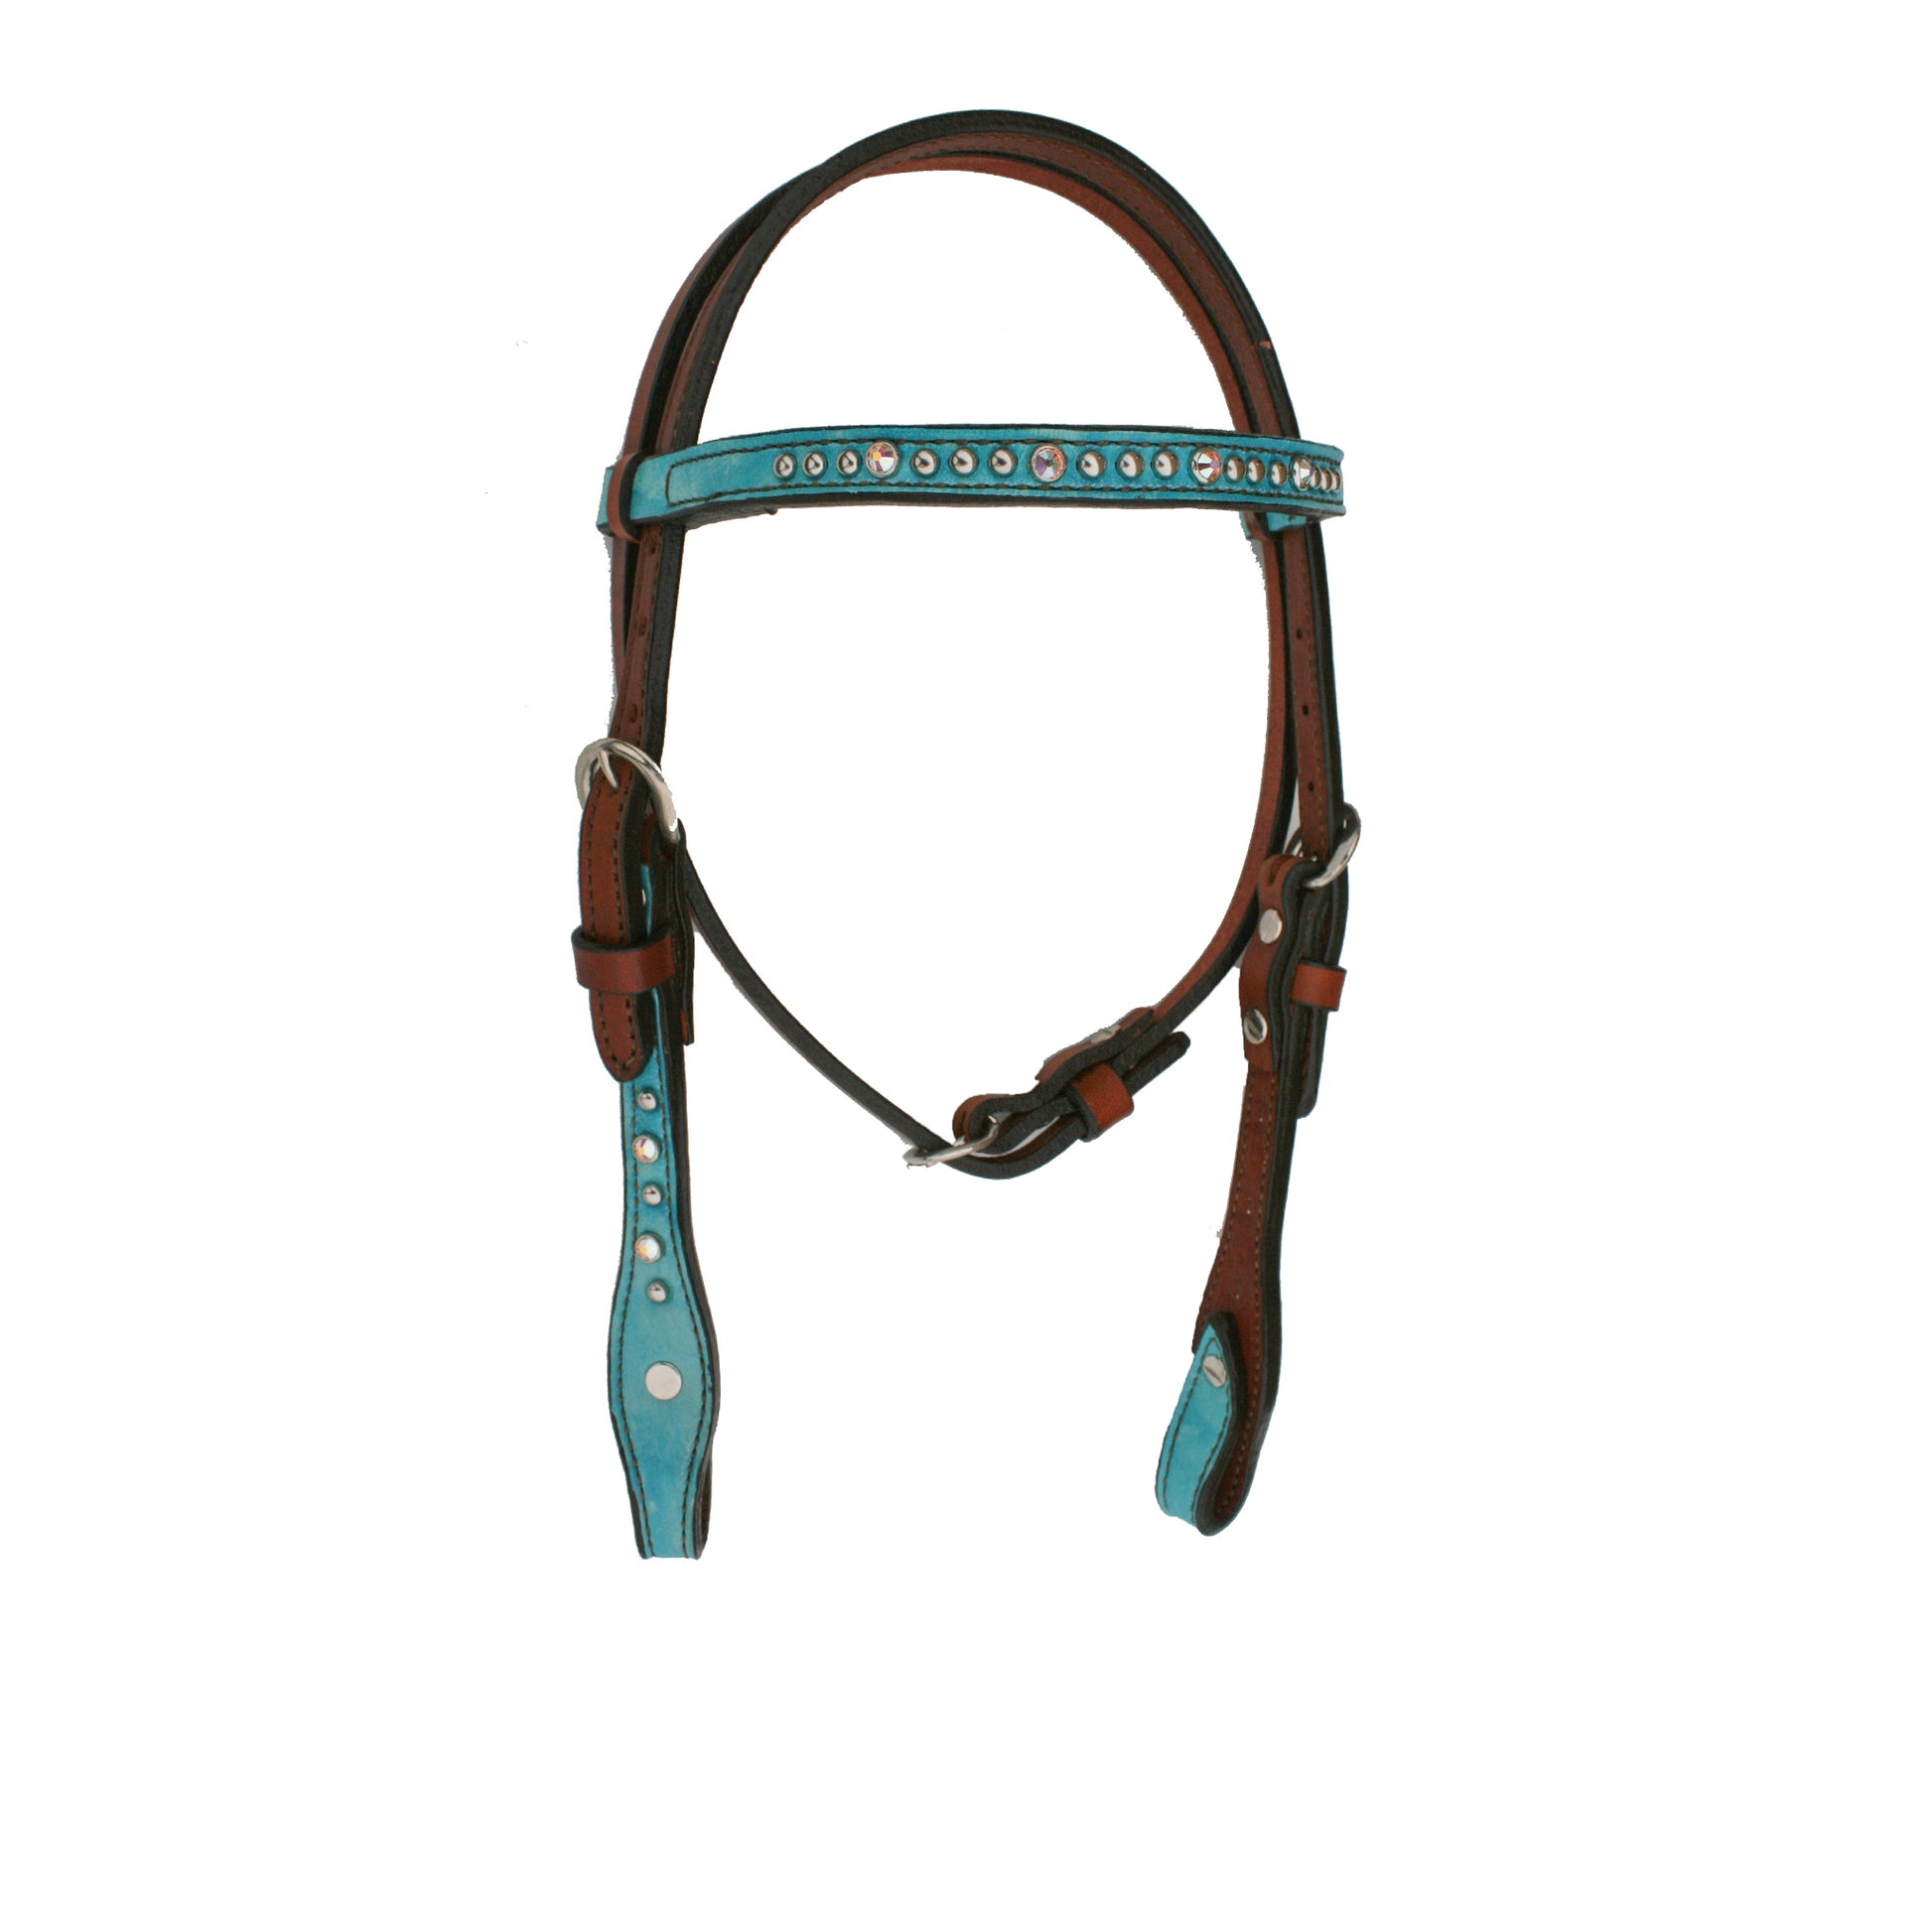 1/2" Pony straight browband headstall toast leather turquoise marble overlay with Swarovski crystals and SS spots.  